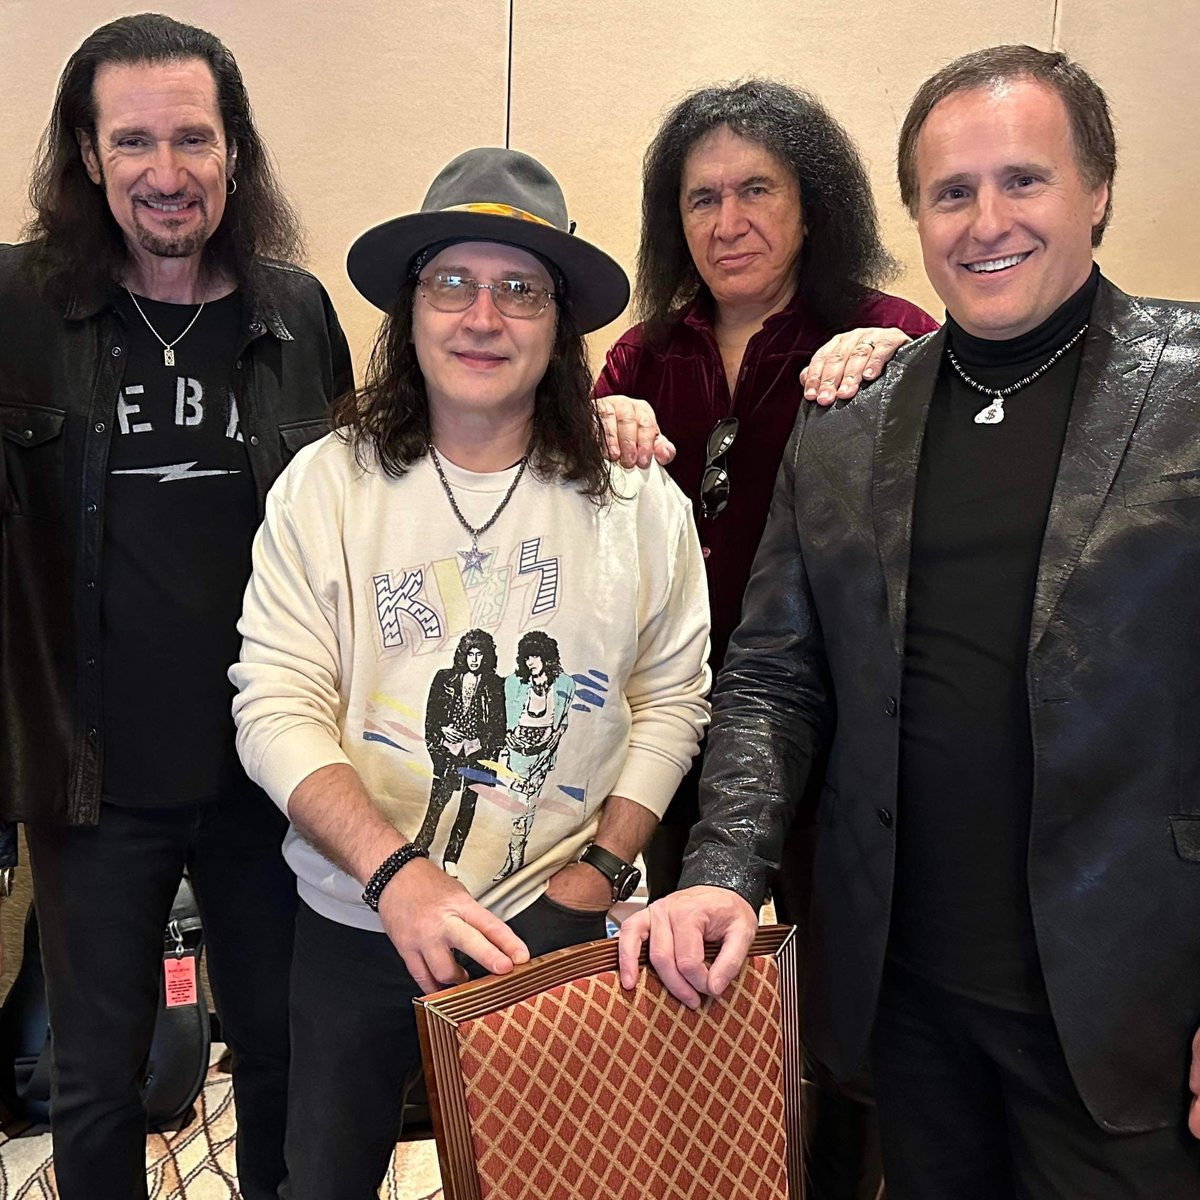 One year ago, Gene had an amazing weekend event in Las Vegas at the Rio Hotel Casino. Here's a funny photo of Eric, Gene, and Gerry McCambridge (The Mentalist) and I backstage. Fun times! @genesimmons